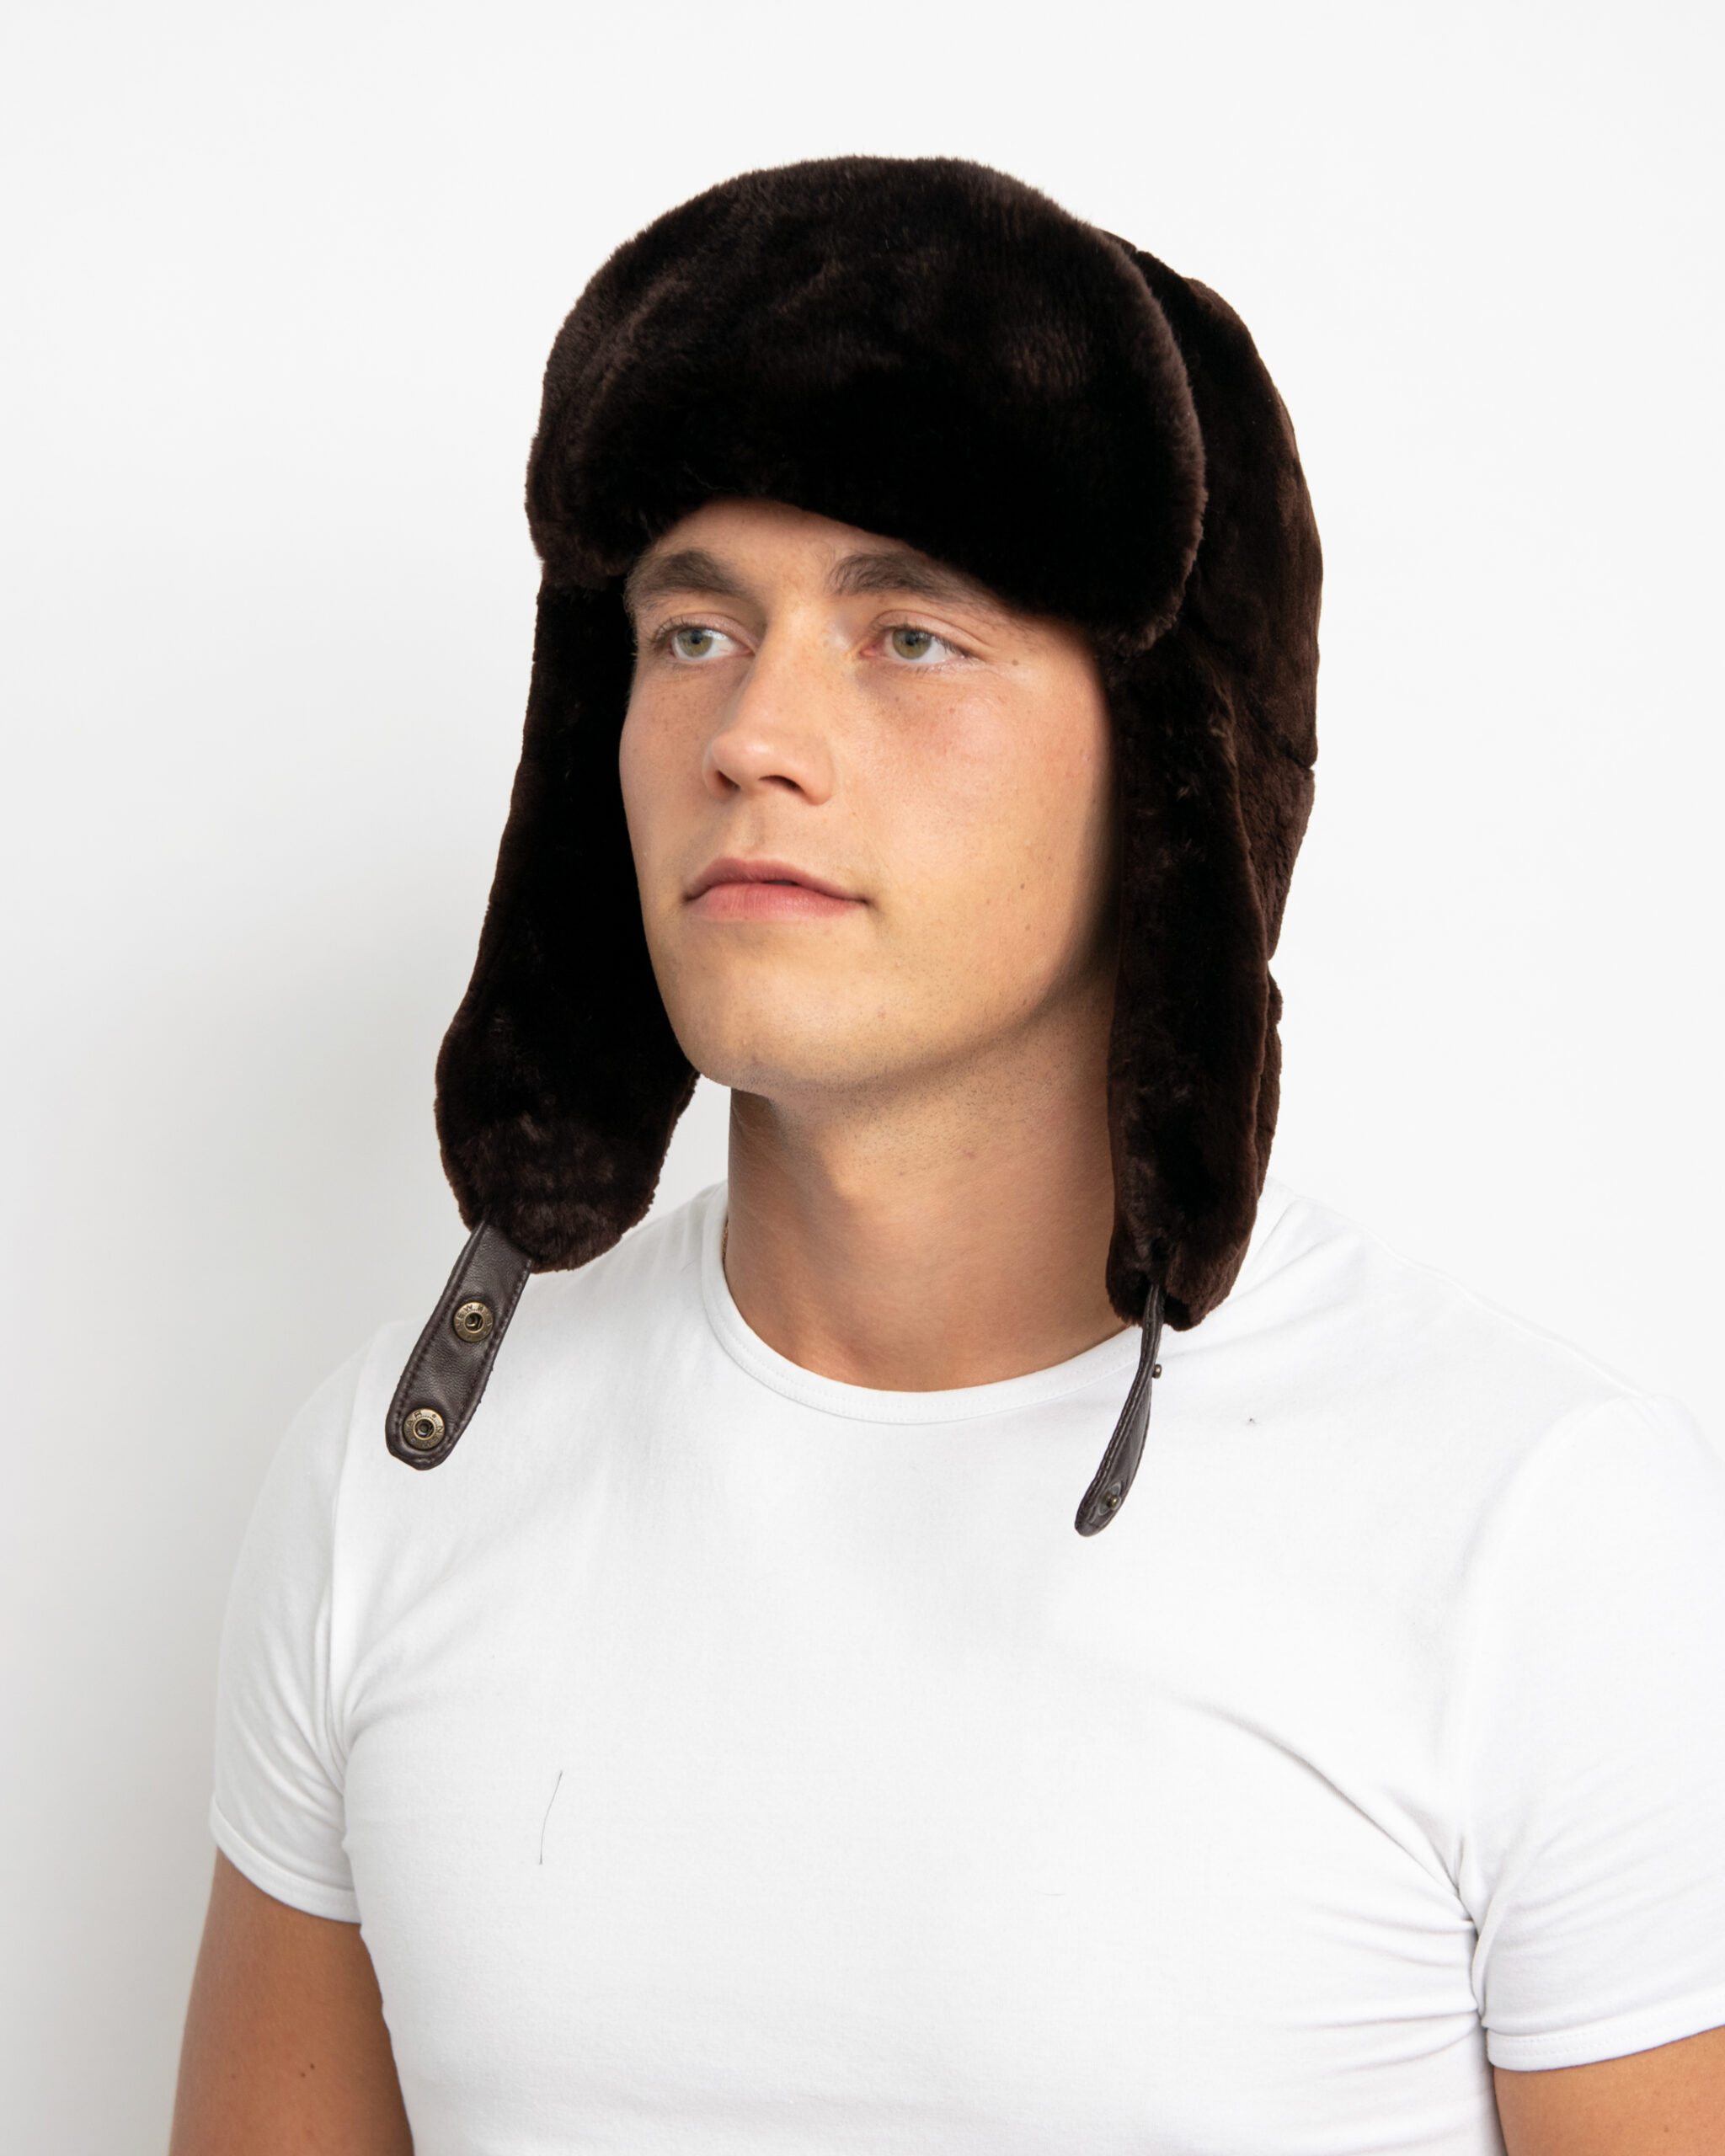 Buy Trapper Hat Mens Online In India -  India